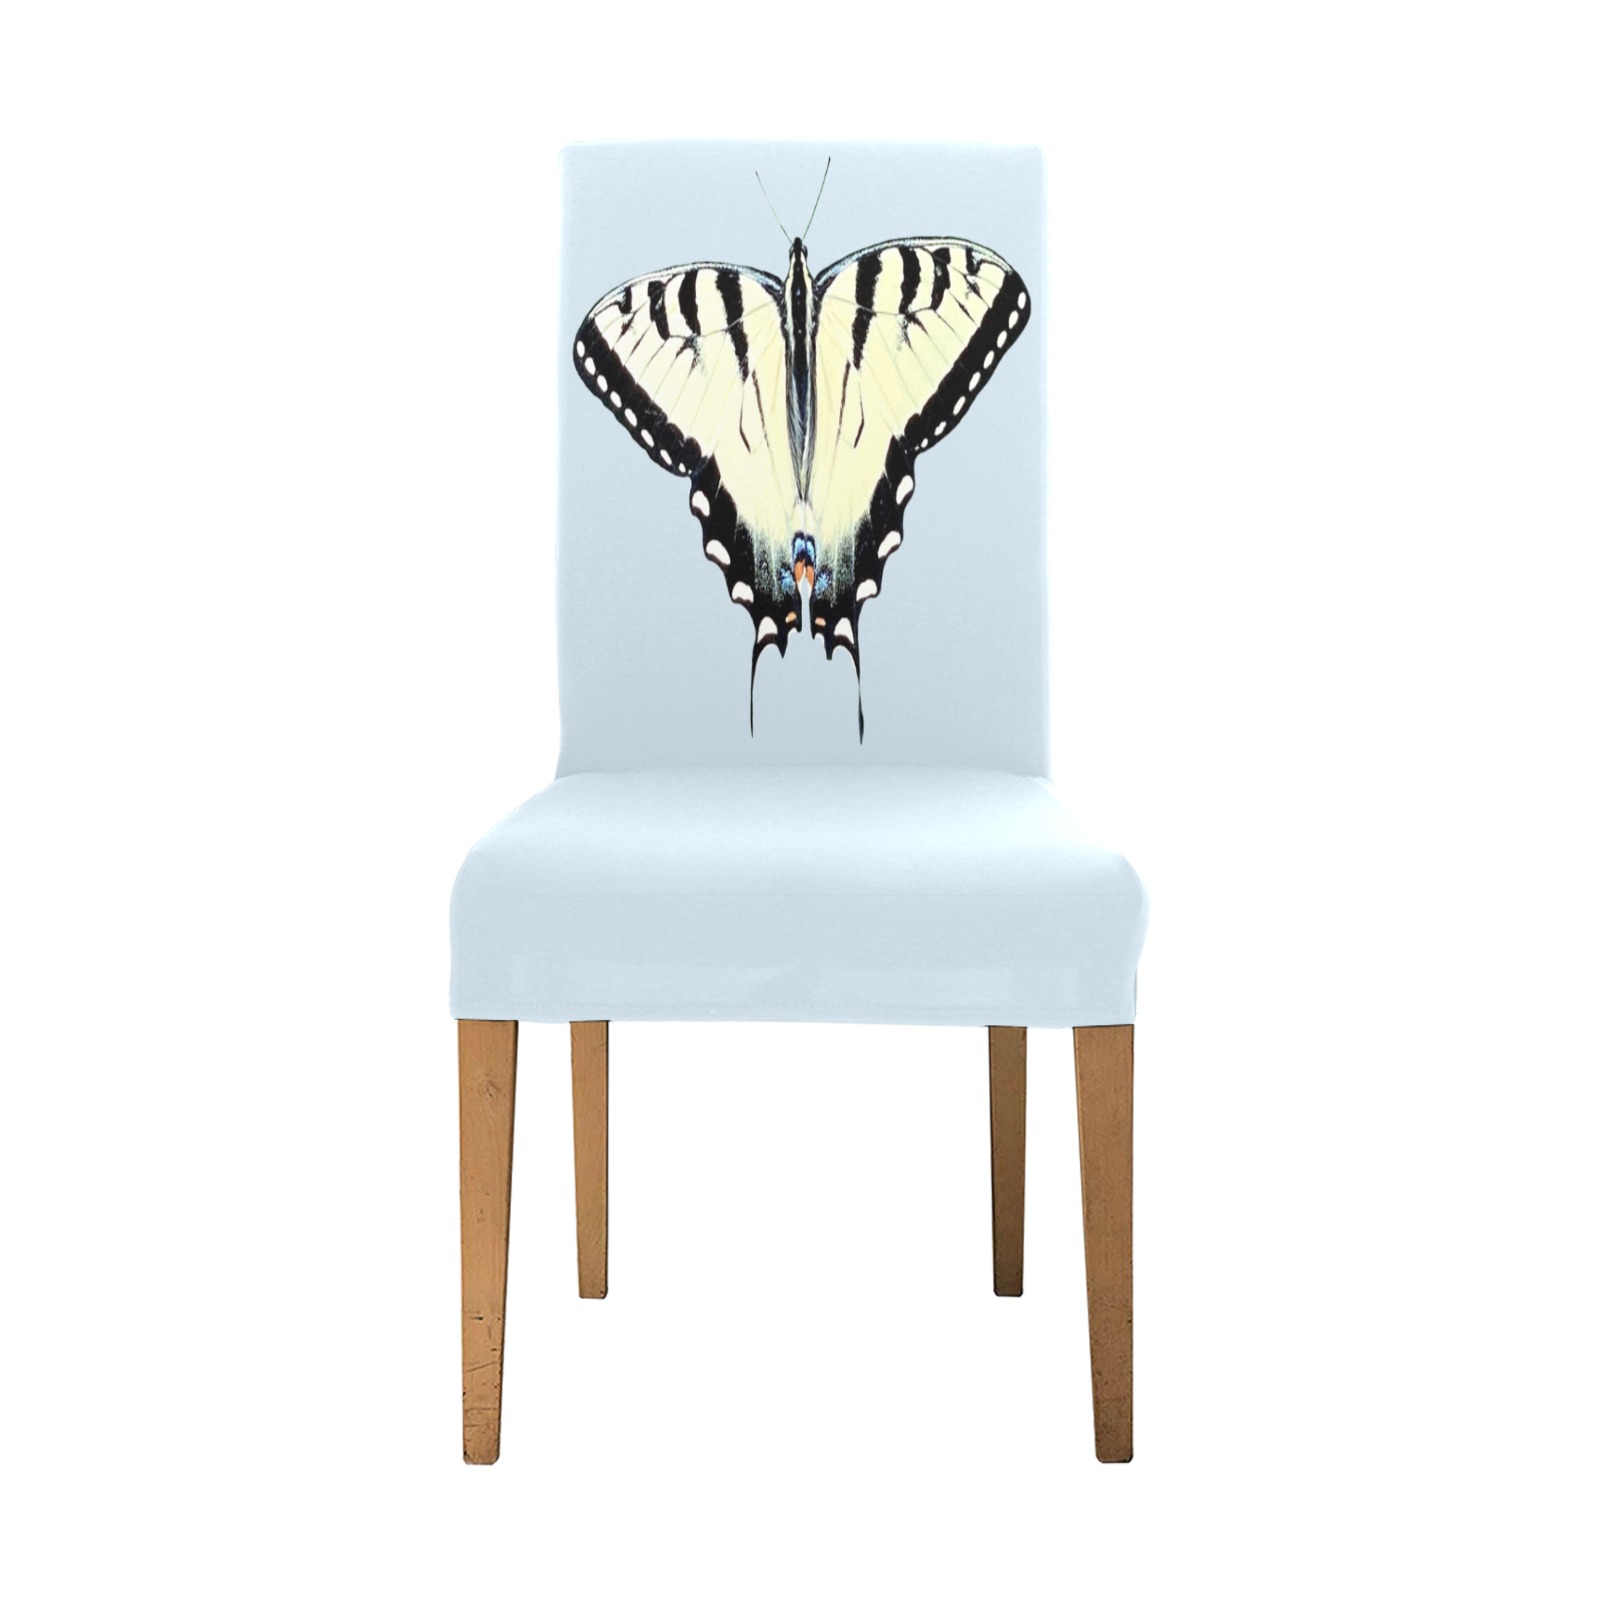 Yellow Tiger Swallowtail Butterfly Chair Cover (Pack of 4)